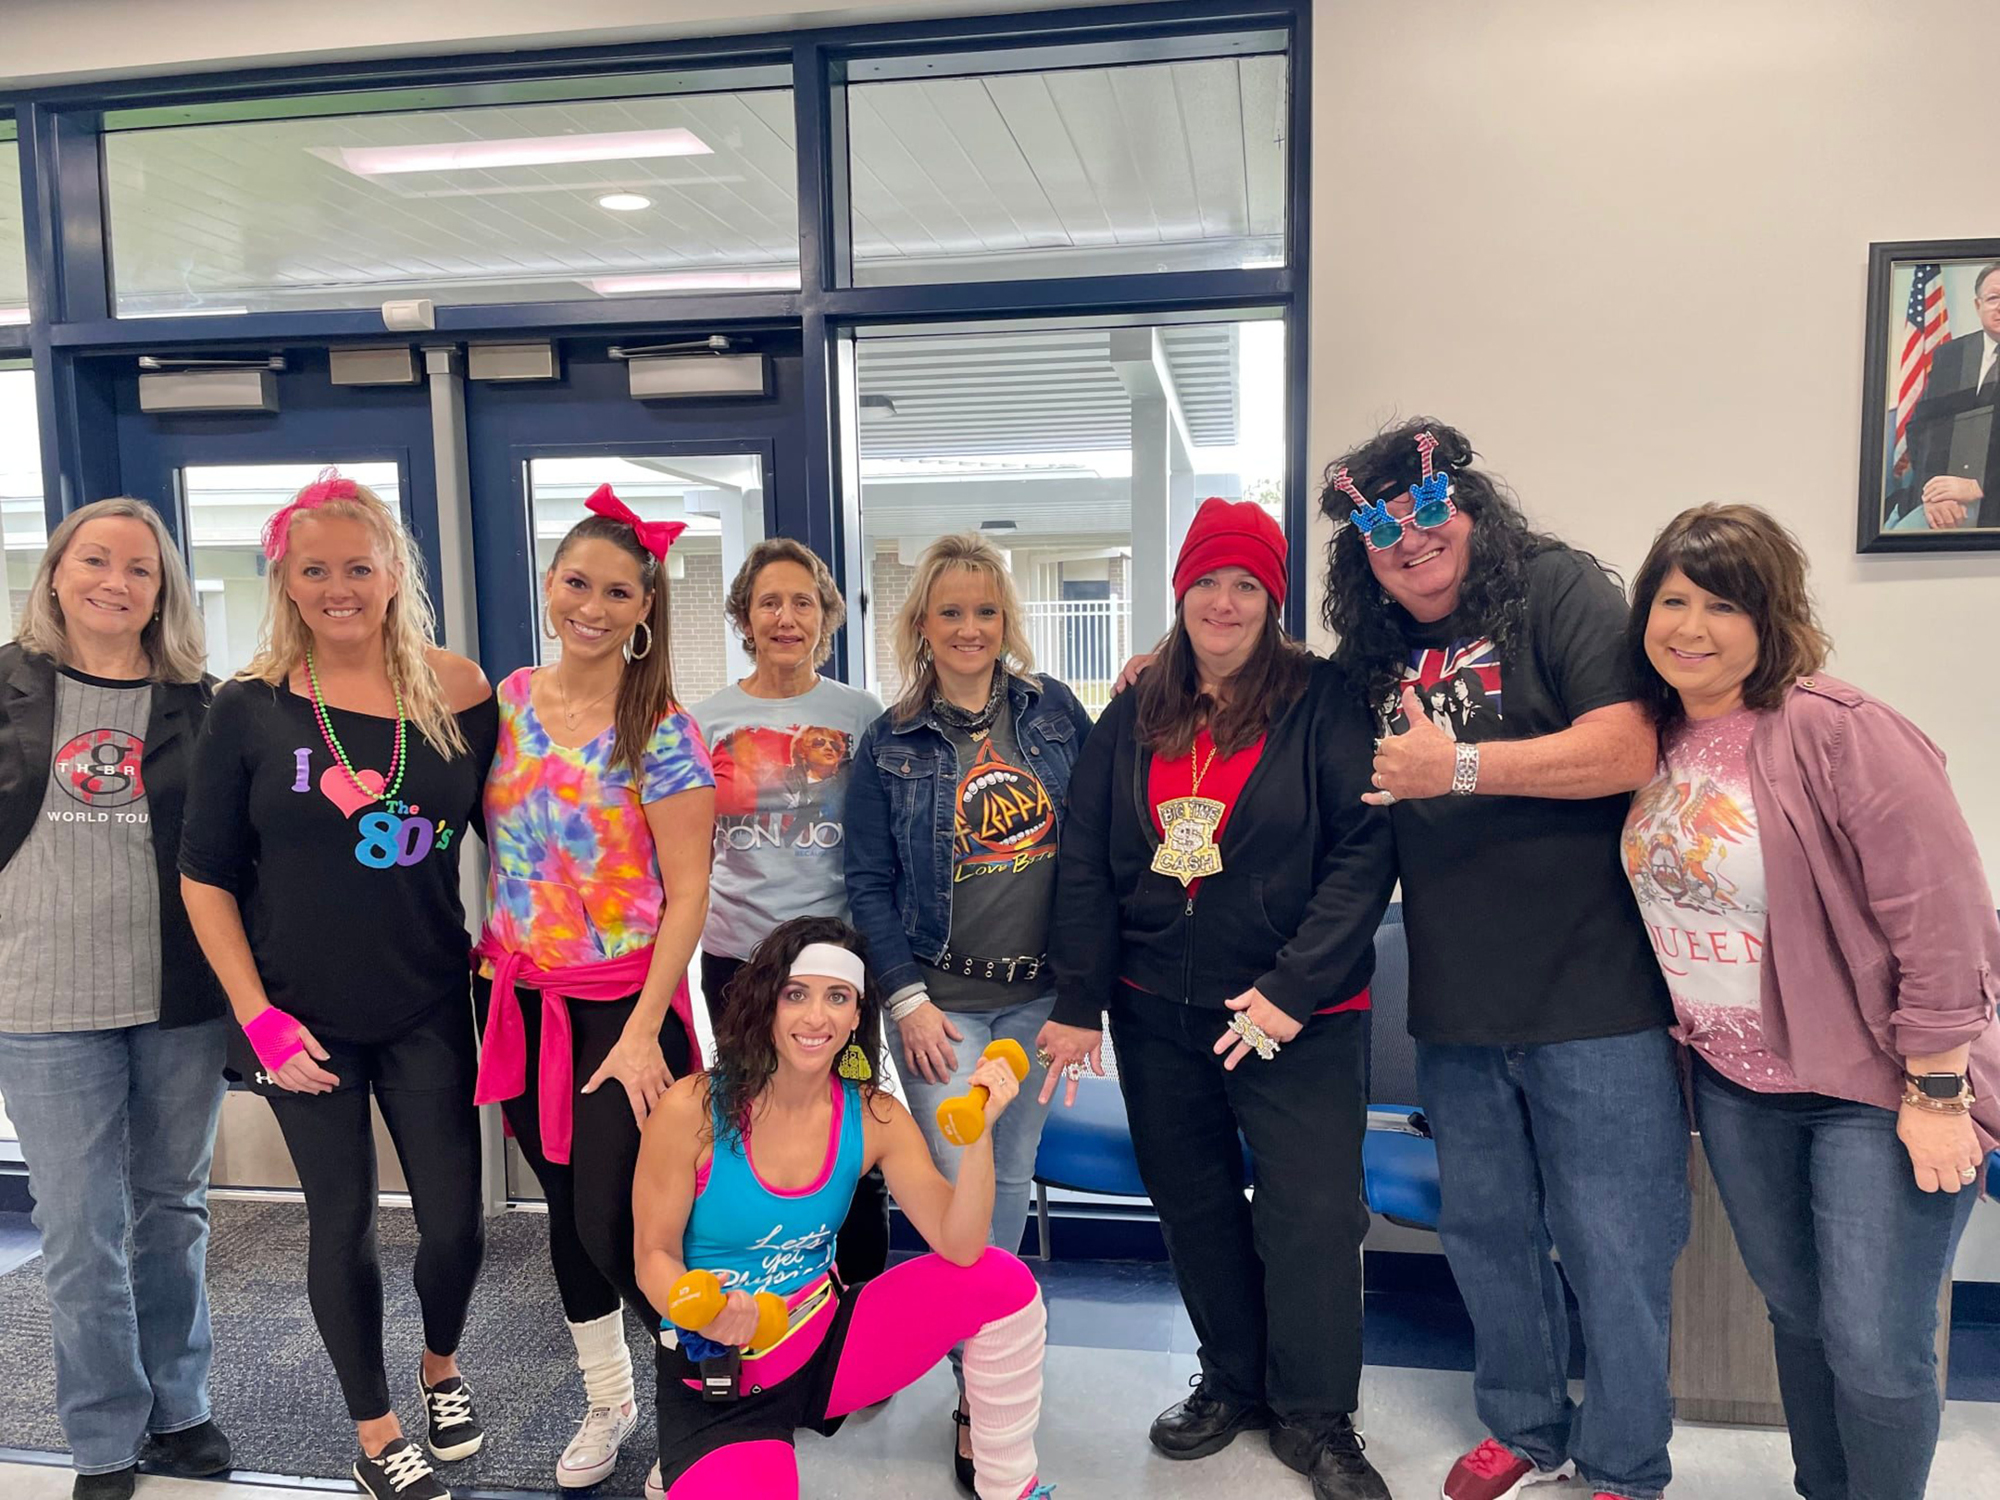 David Marshall, the principal of Gene Witt Elementary, (second to the right) dresses up for a spirit day with teachers and staff. Courtesy photo.